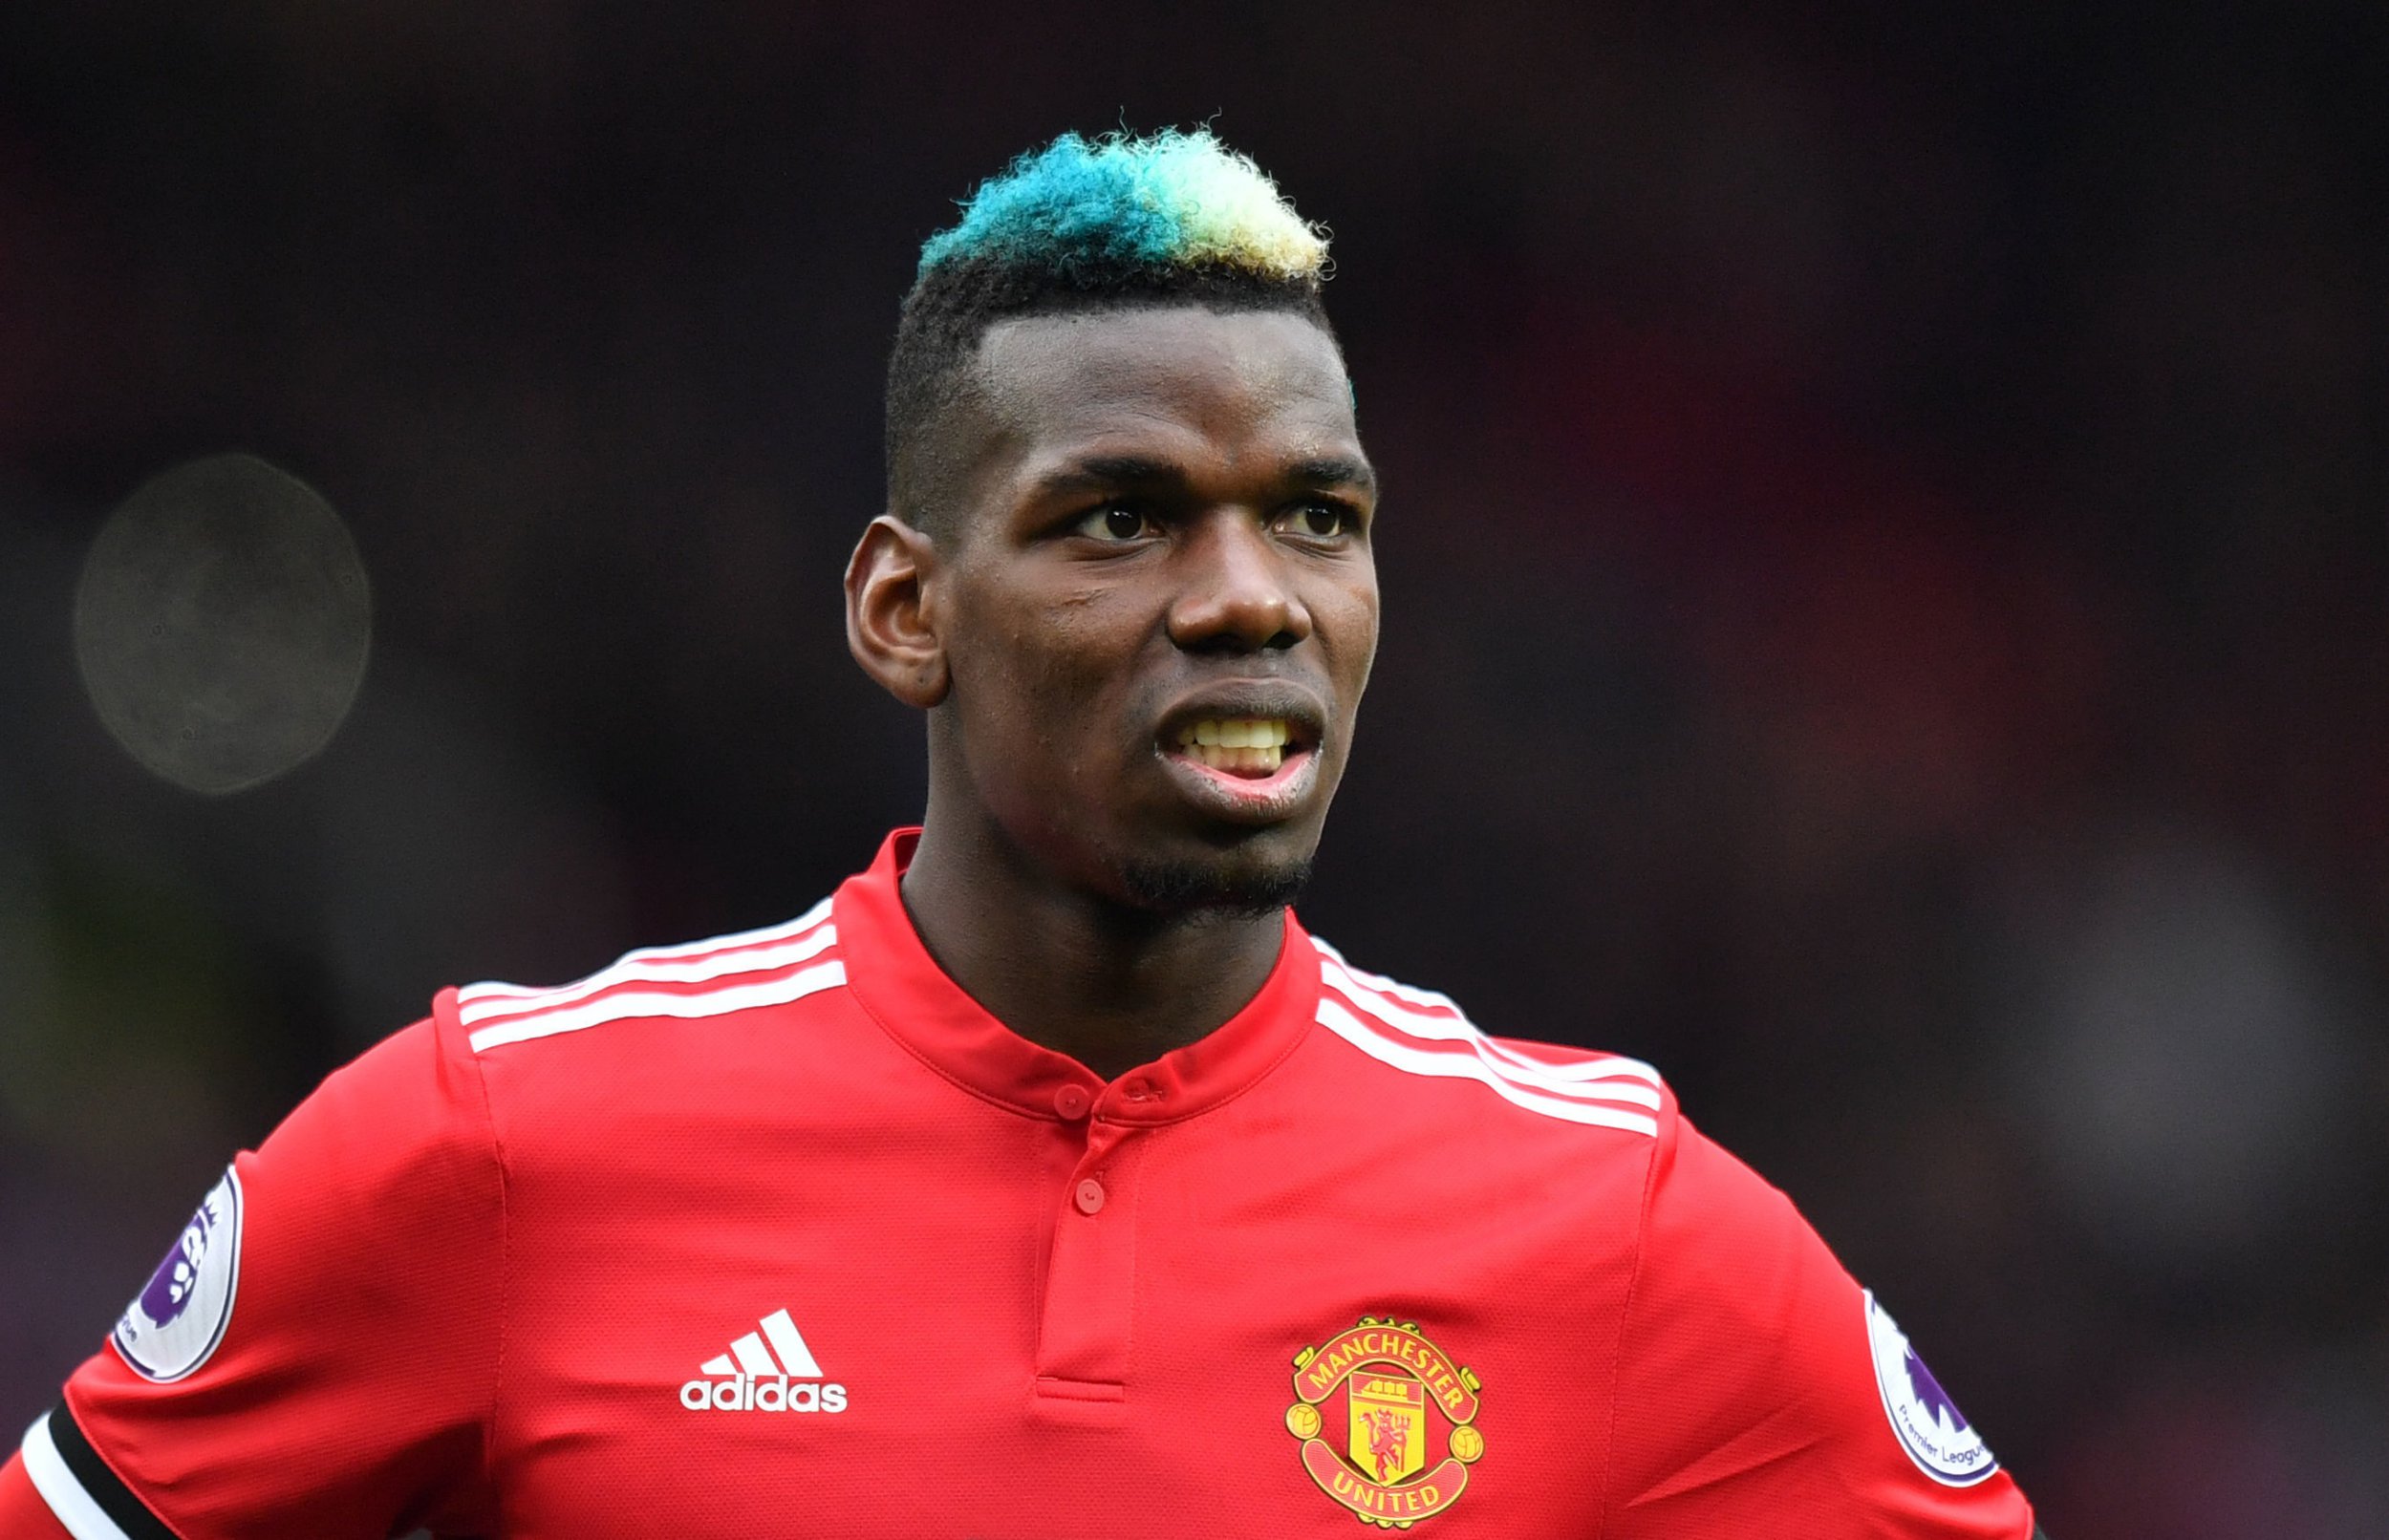 Manchester United target Gareth Bale sends message to Paul Pogba on Instagram